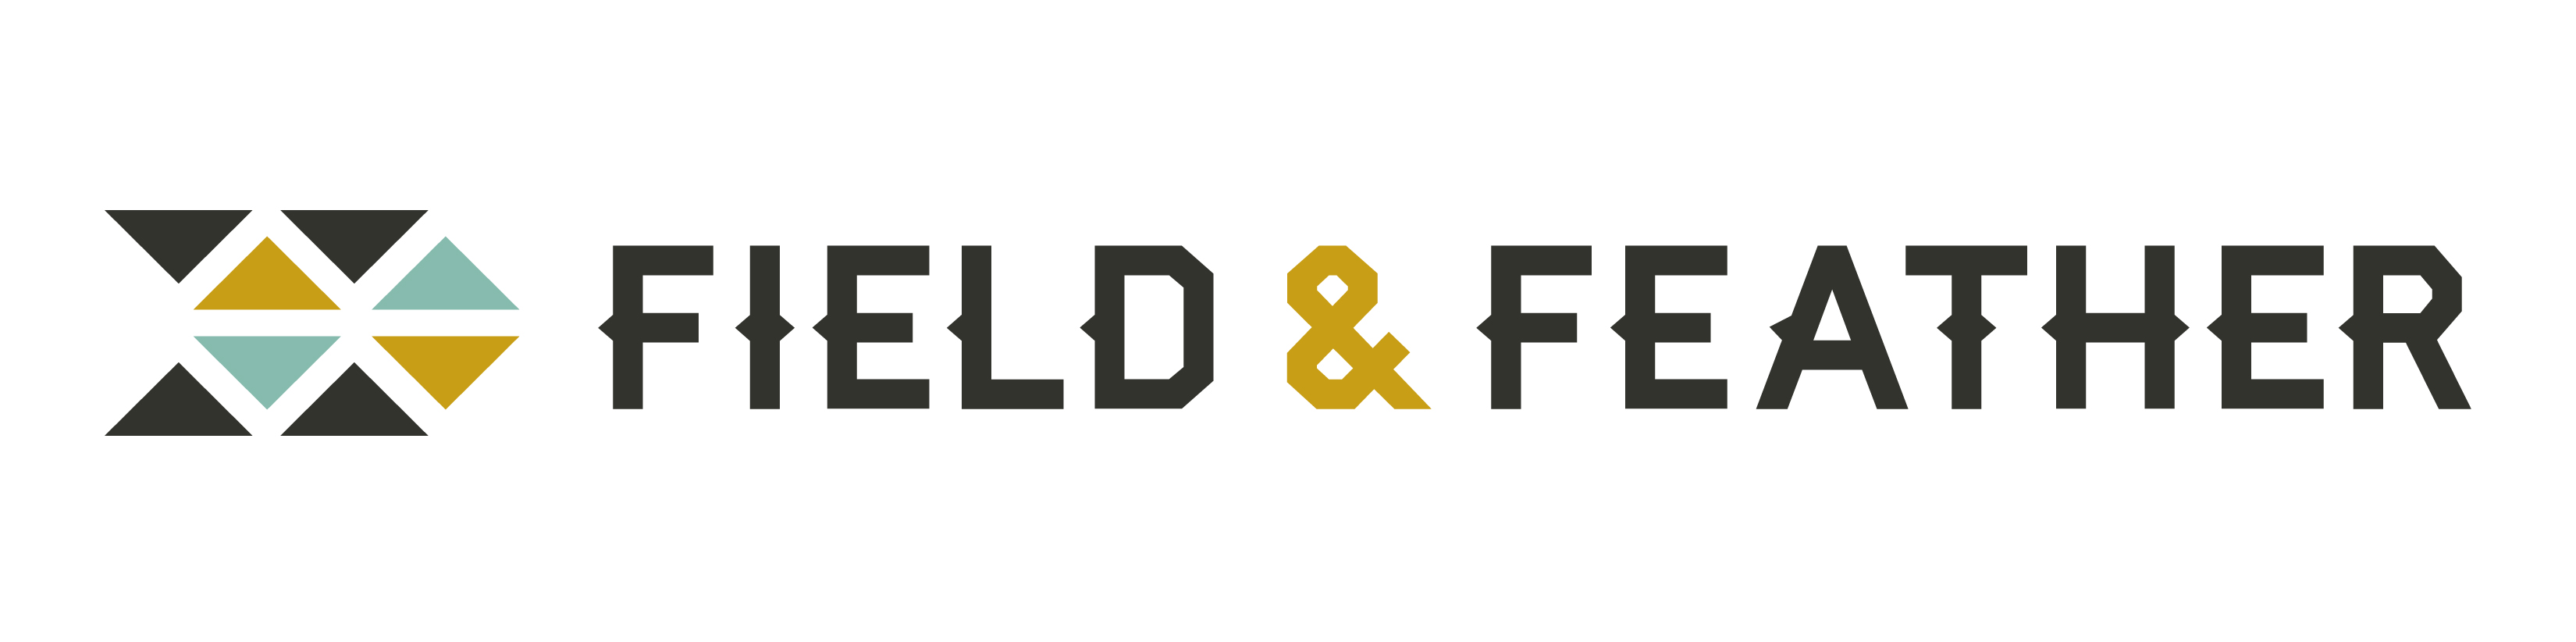 field and feather logo